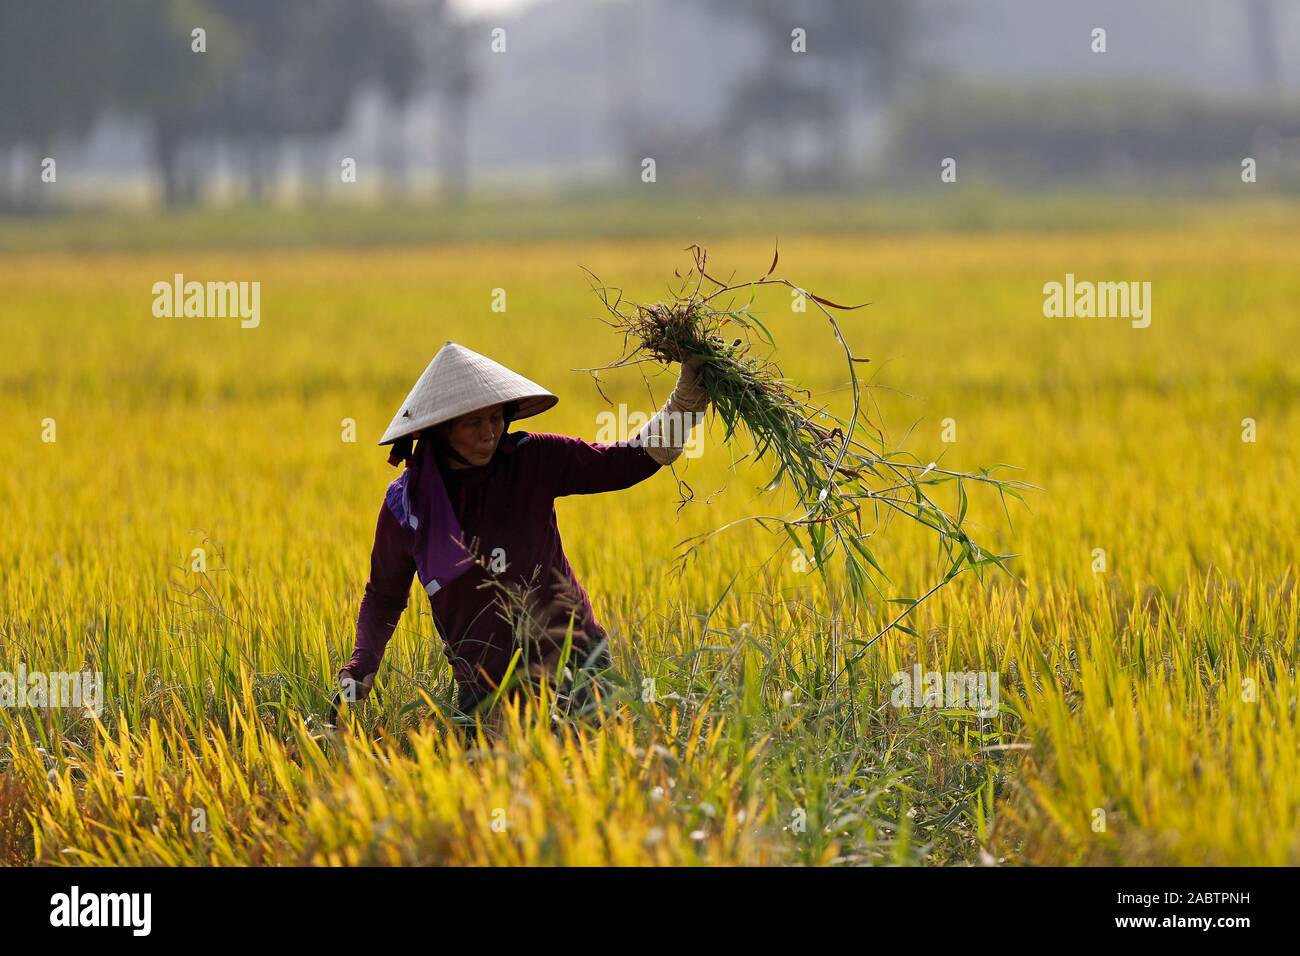 Agriculture. Vietnamese woman working in a rice field.  Hoi An. Vietnam. Stock Photo